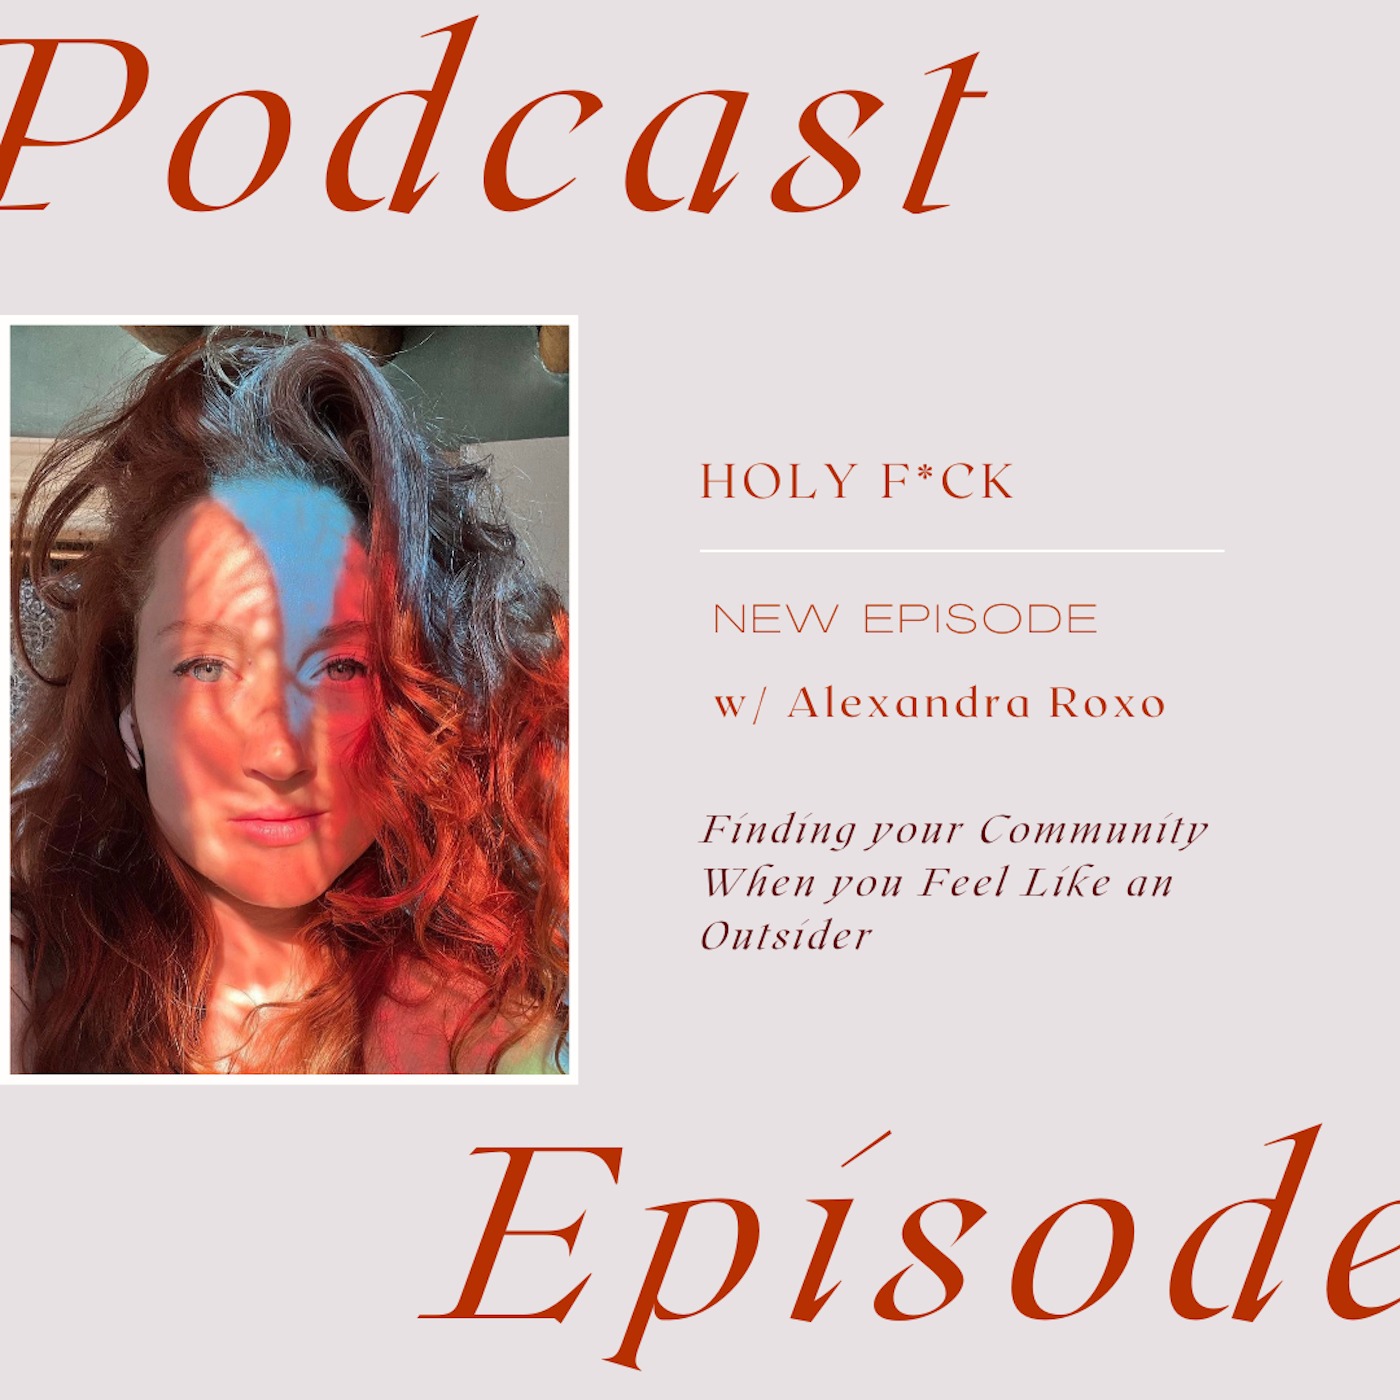 Finding your Community When you Feel Like an Outsider with Alexandra Roxo